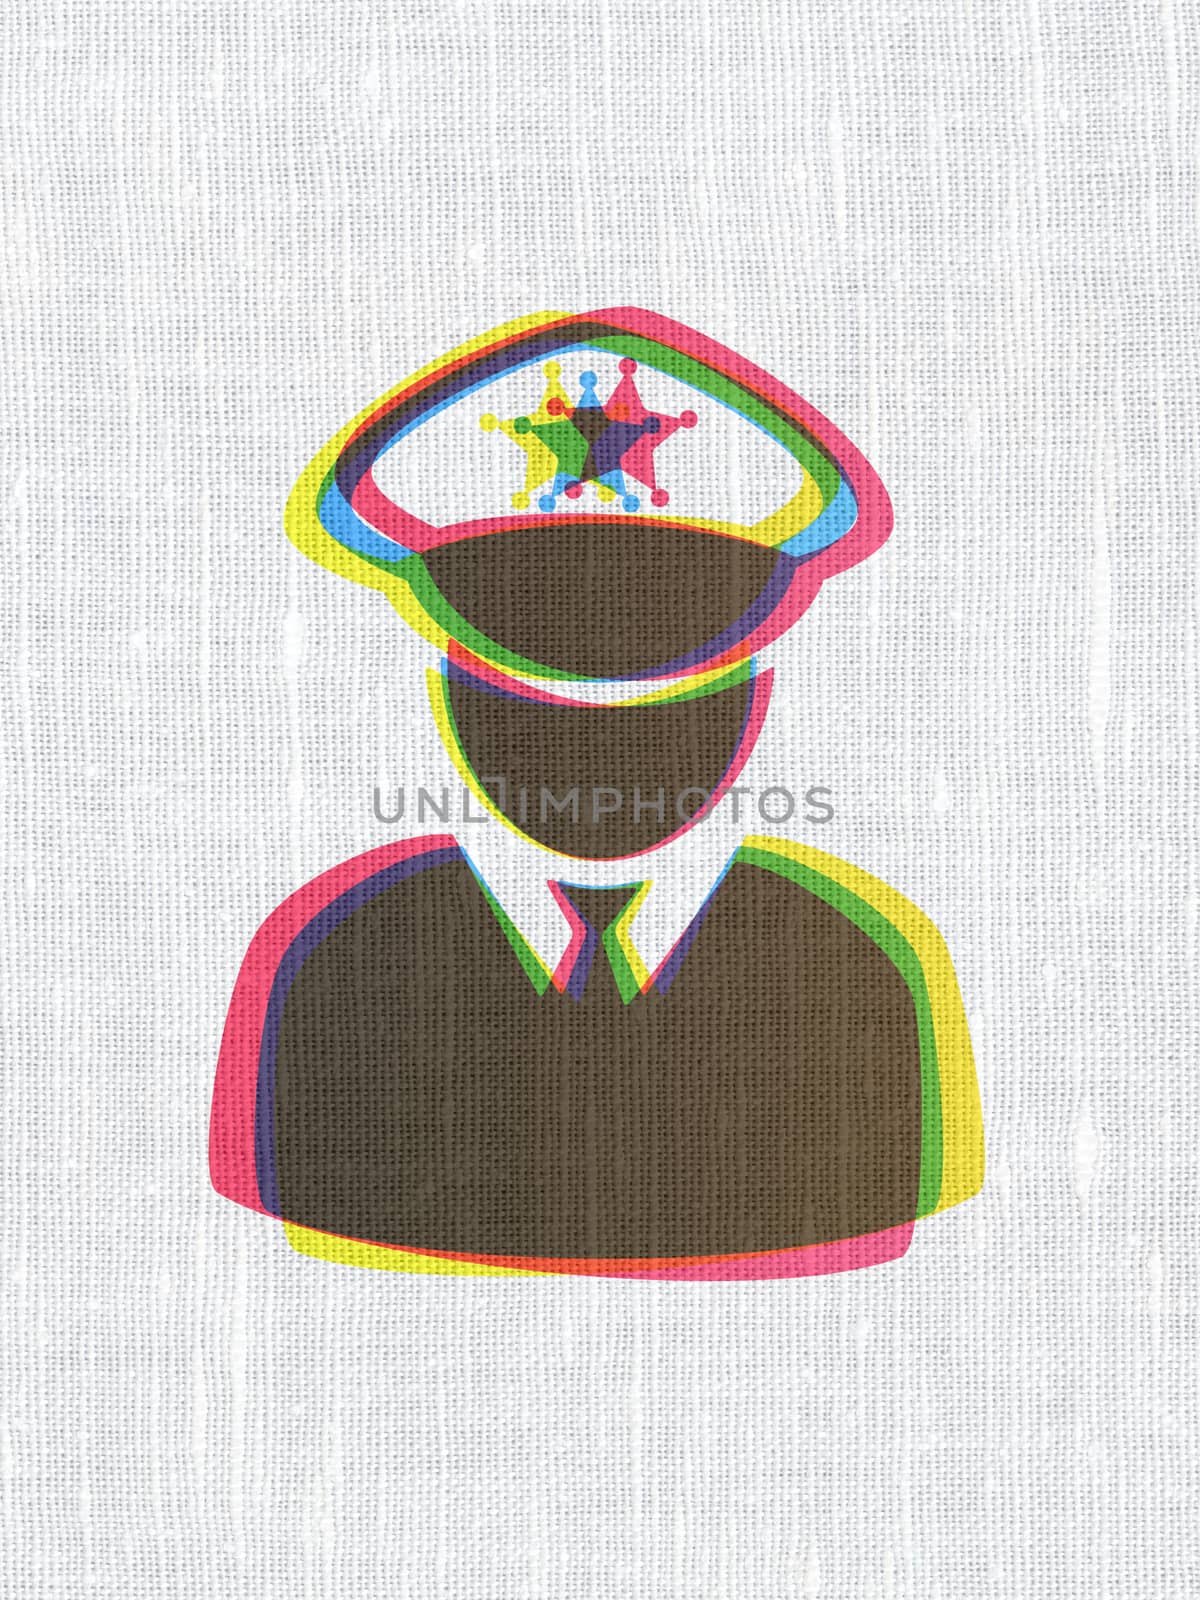 Law concept: CMYK Police on linen fabric texture background